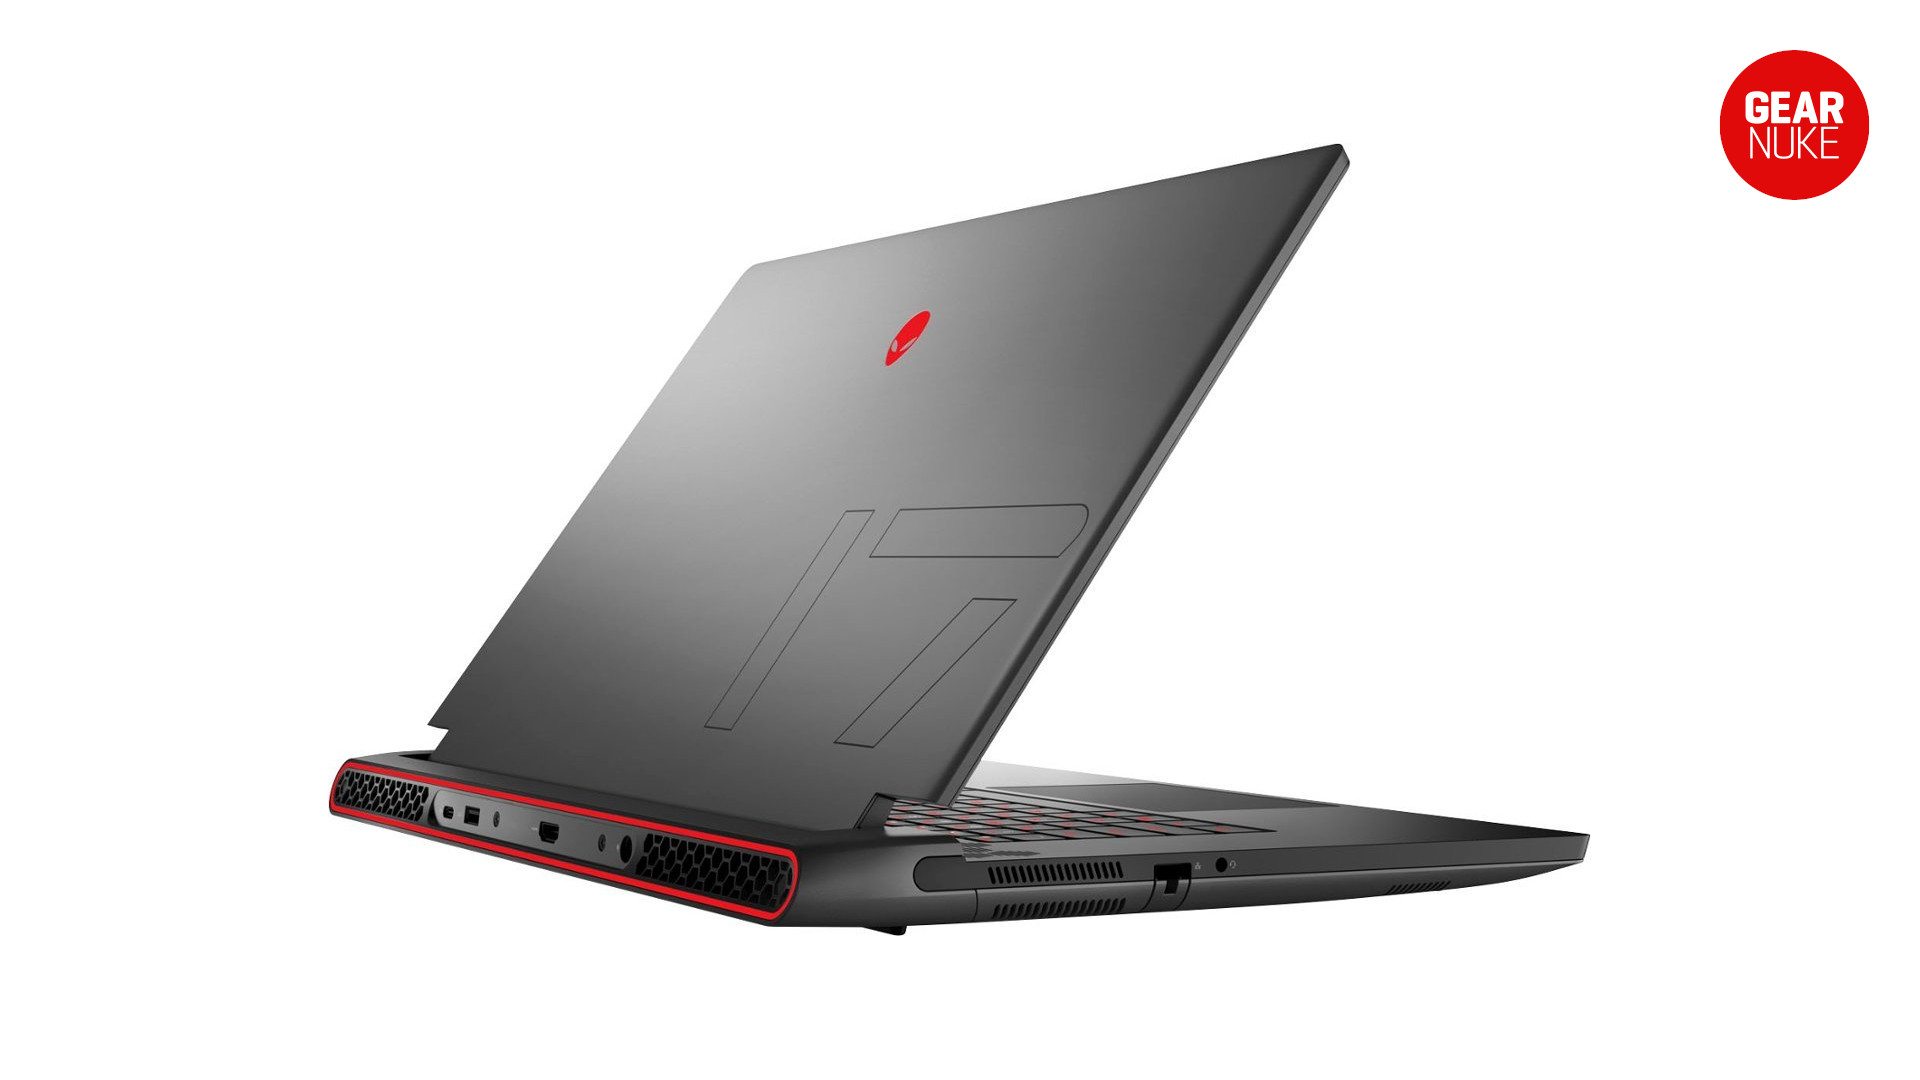 A rear view of the Alienware m17 R5 laptop